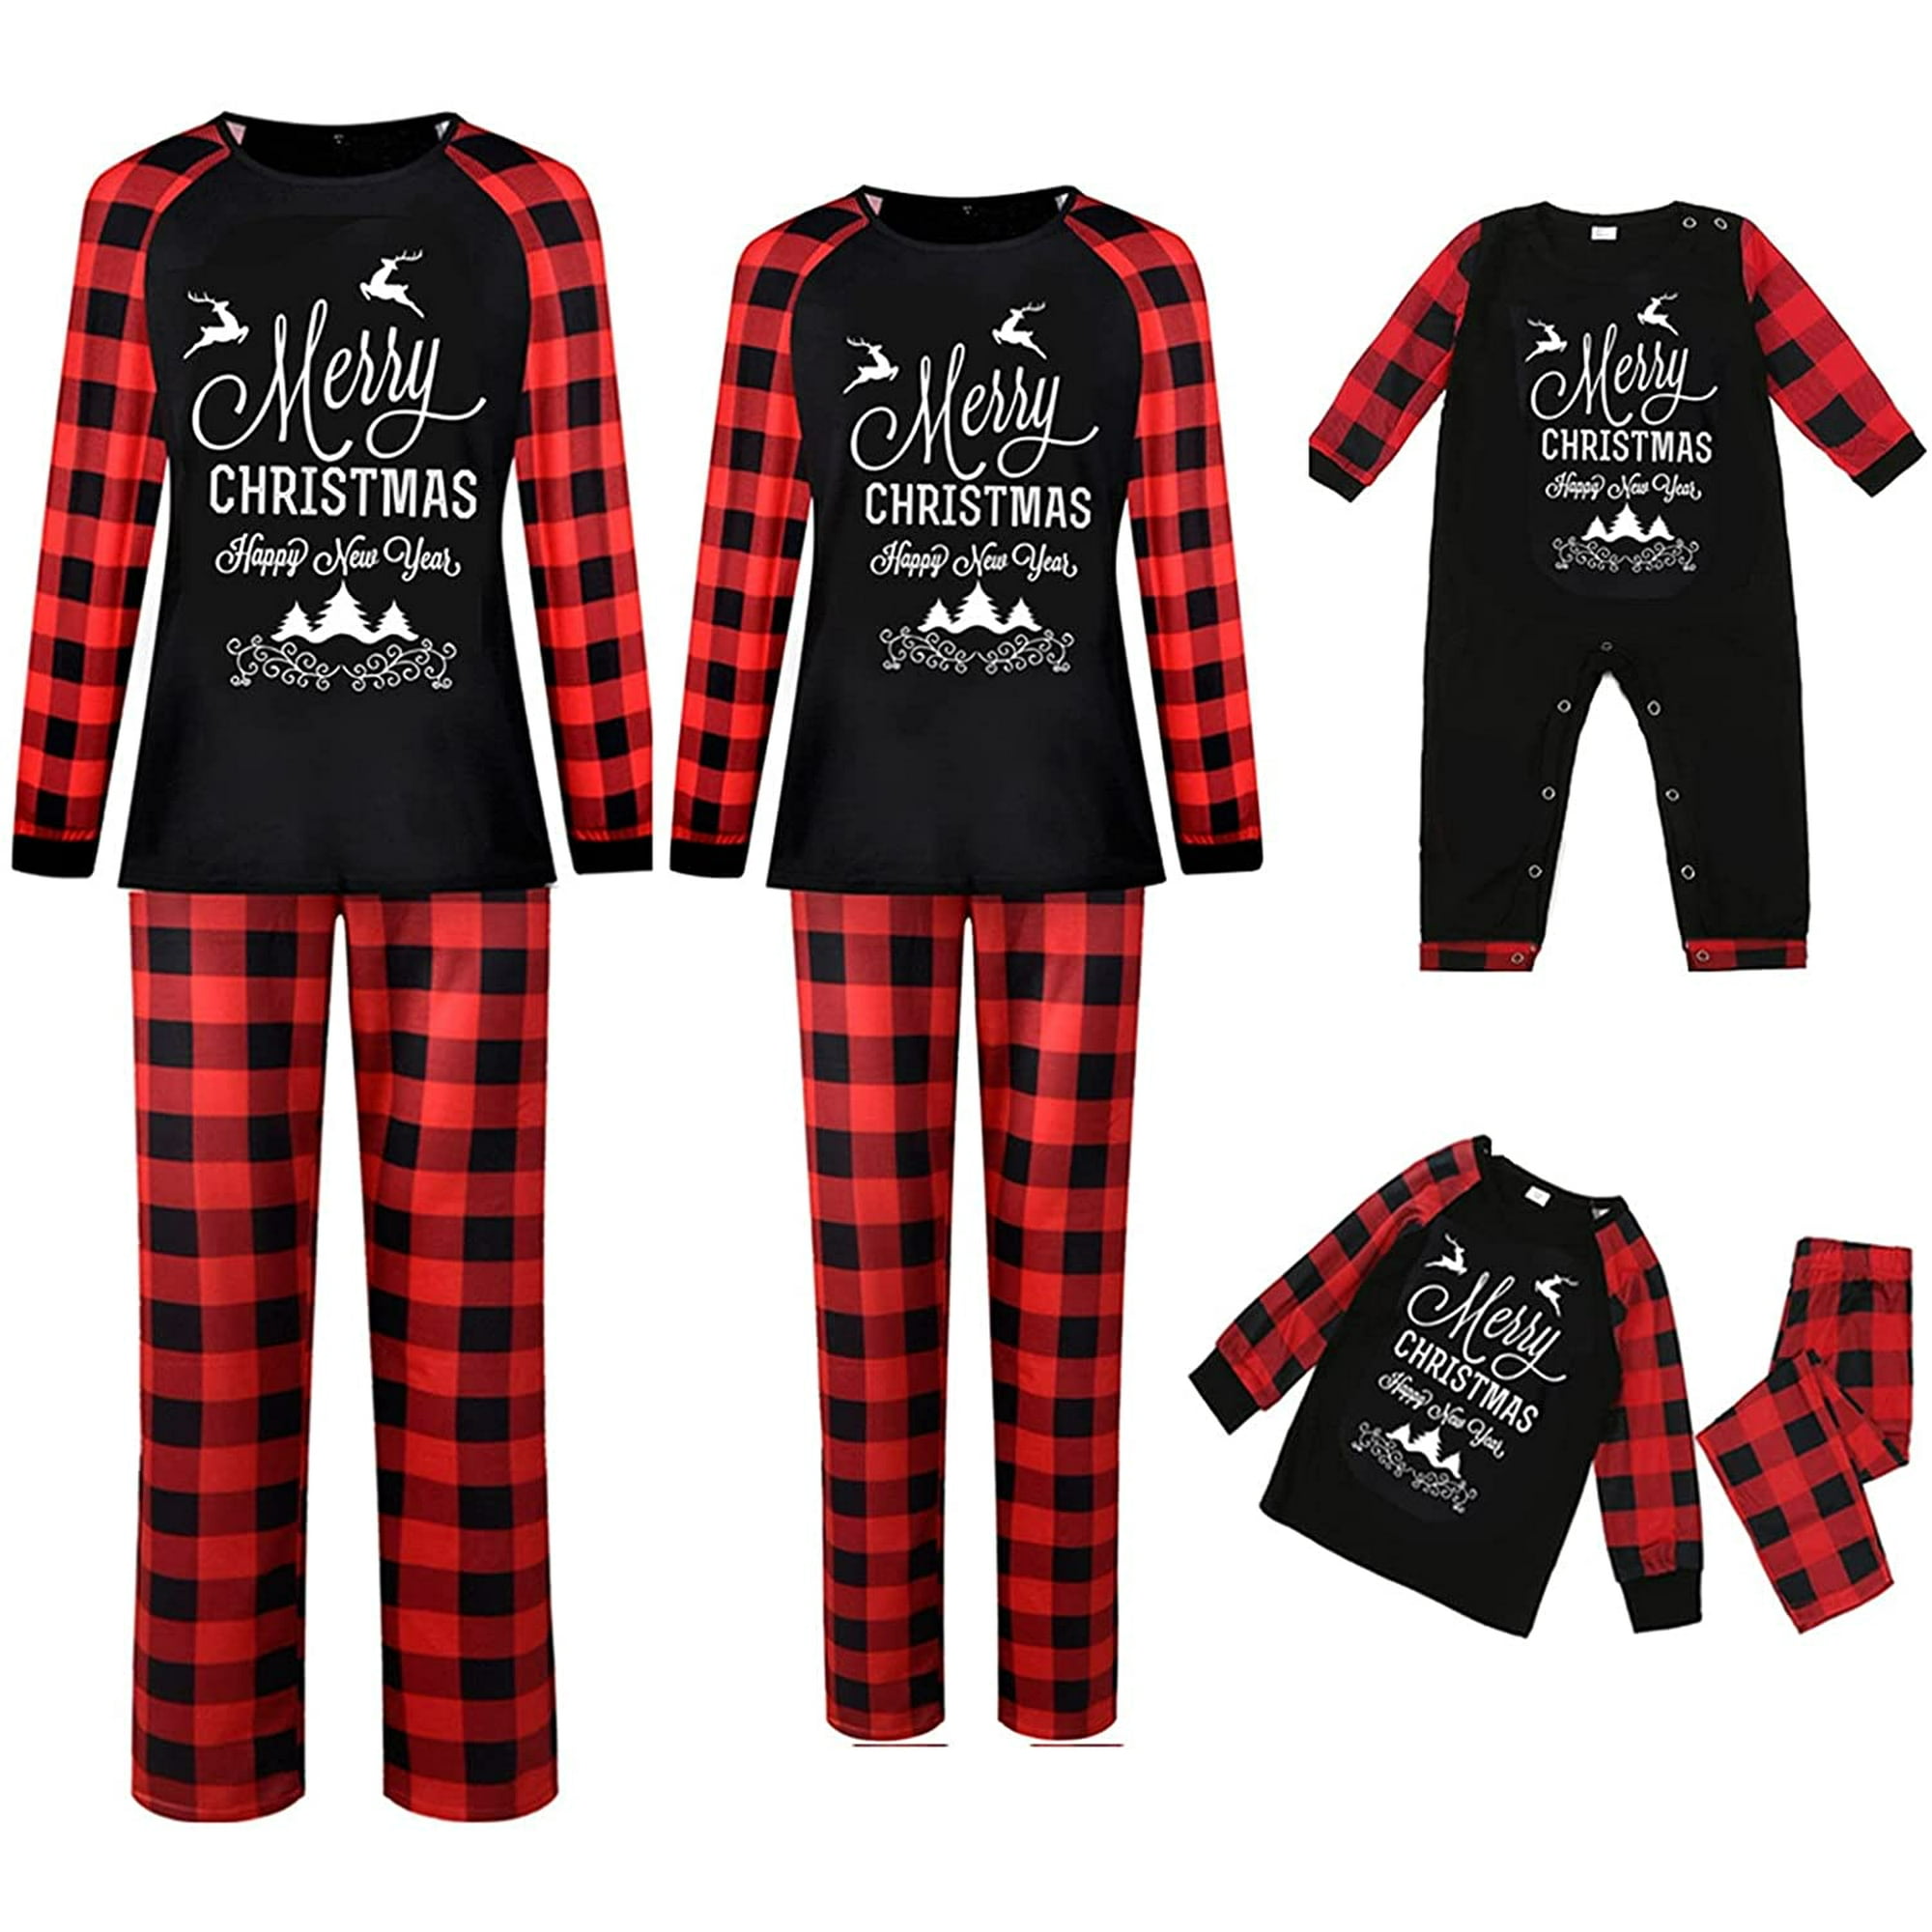 Merry Christmas Pajamas For Family Happy New Year Funny Letter Print Family Matching Pjs Sets Holiday Xmas Sleepwear Walmart Canada